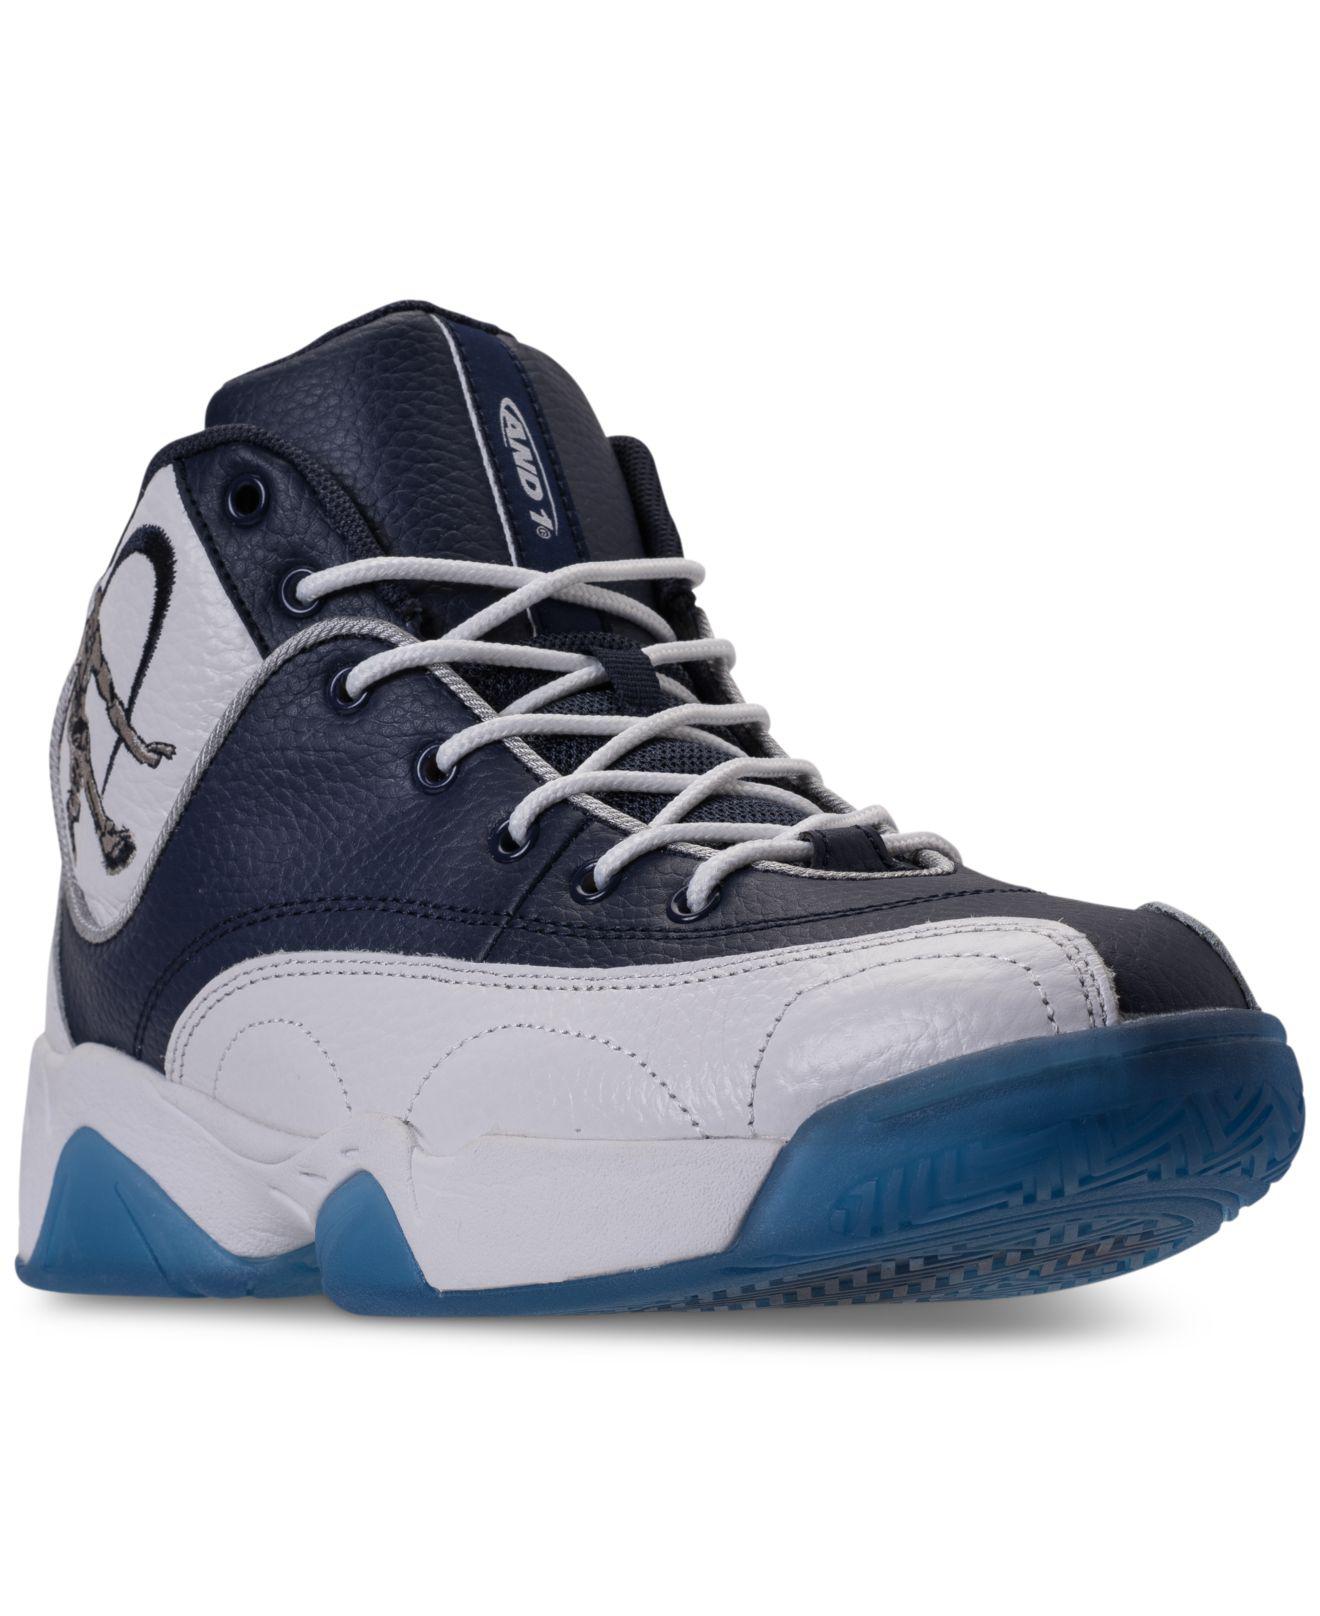 AND1 Men's Coney Island Classic Basketball Sneakers From Finish Line in ...